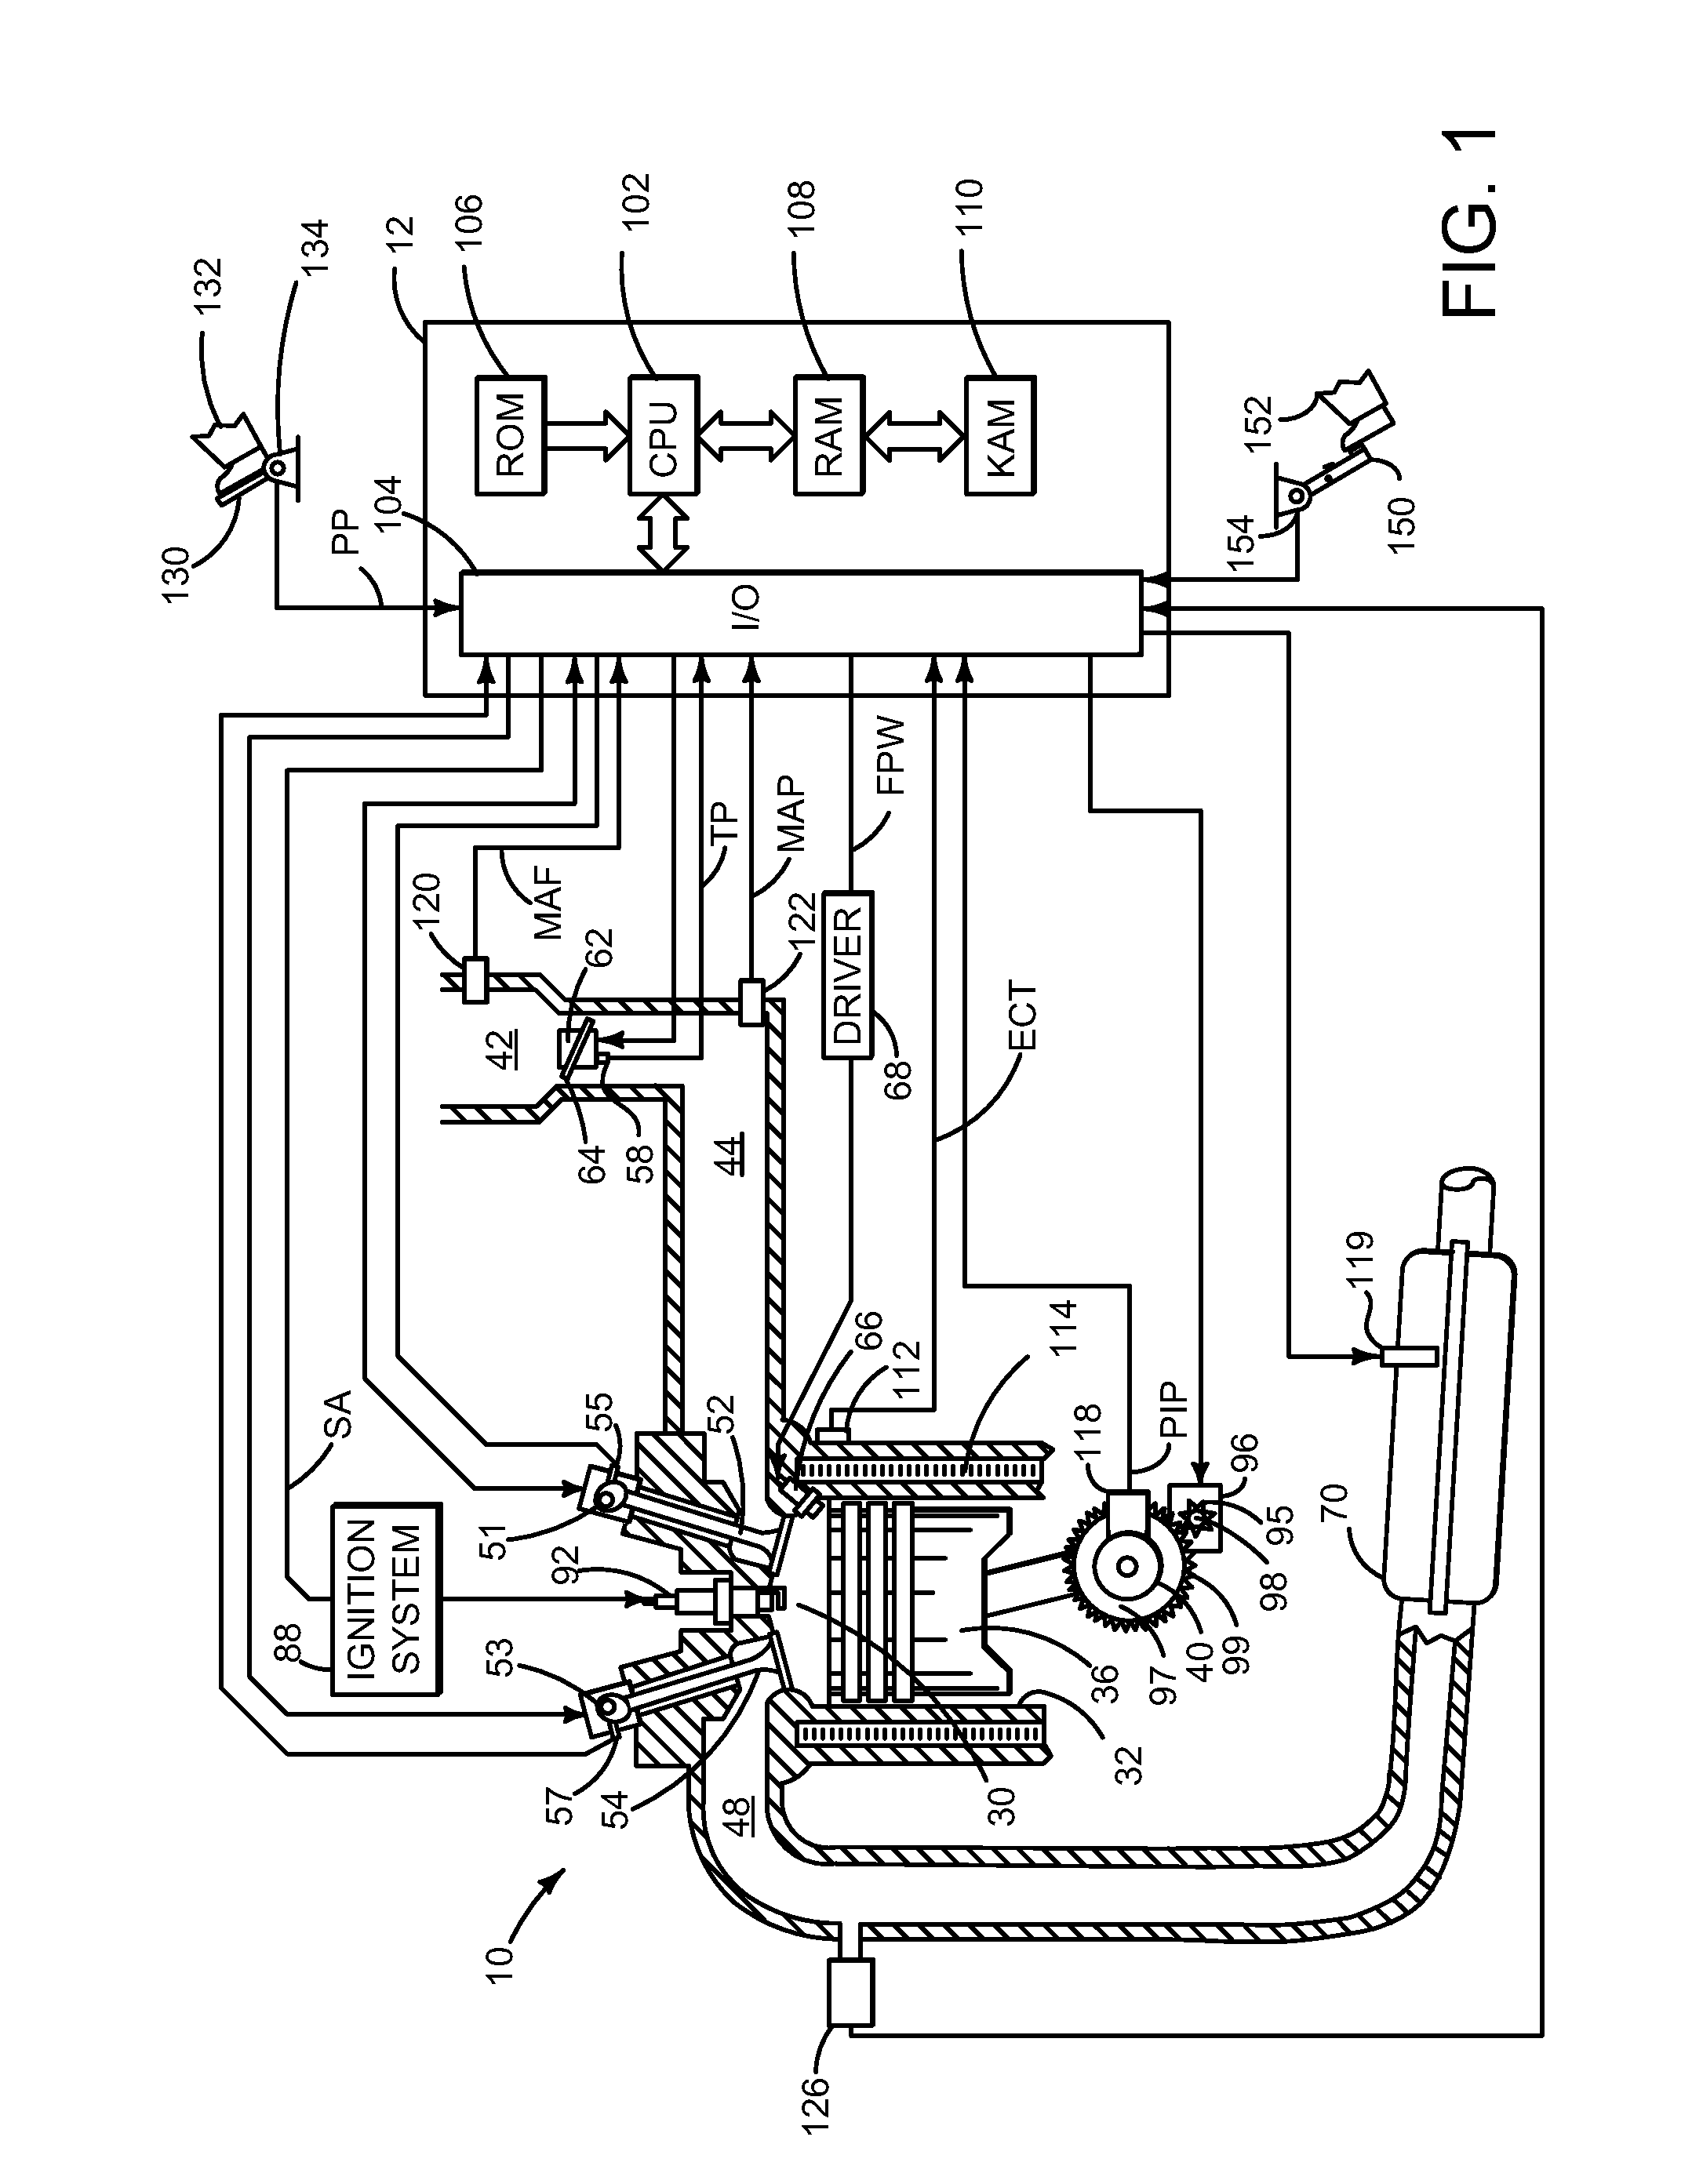 Methods and systems for adjusting cylinder air charge